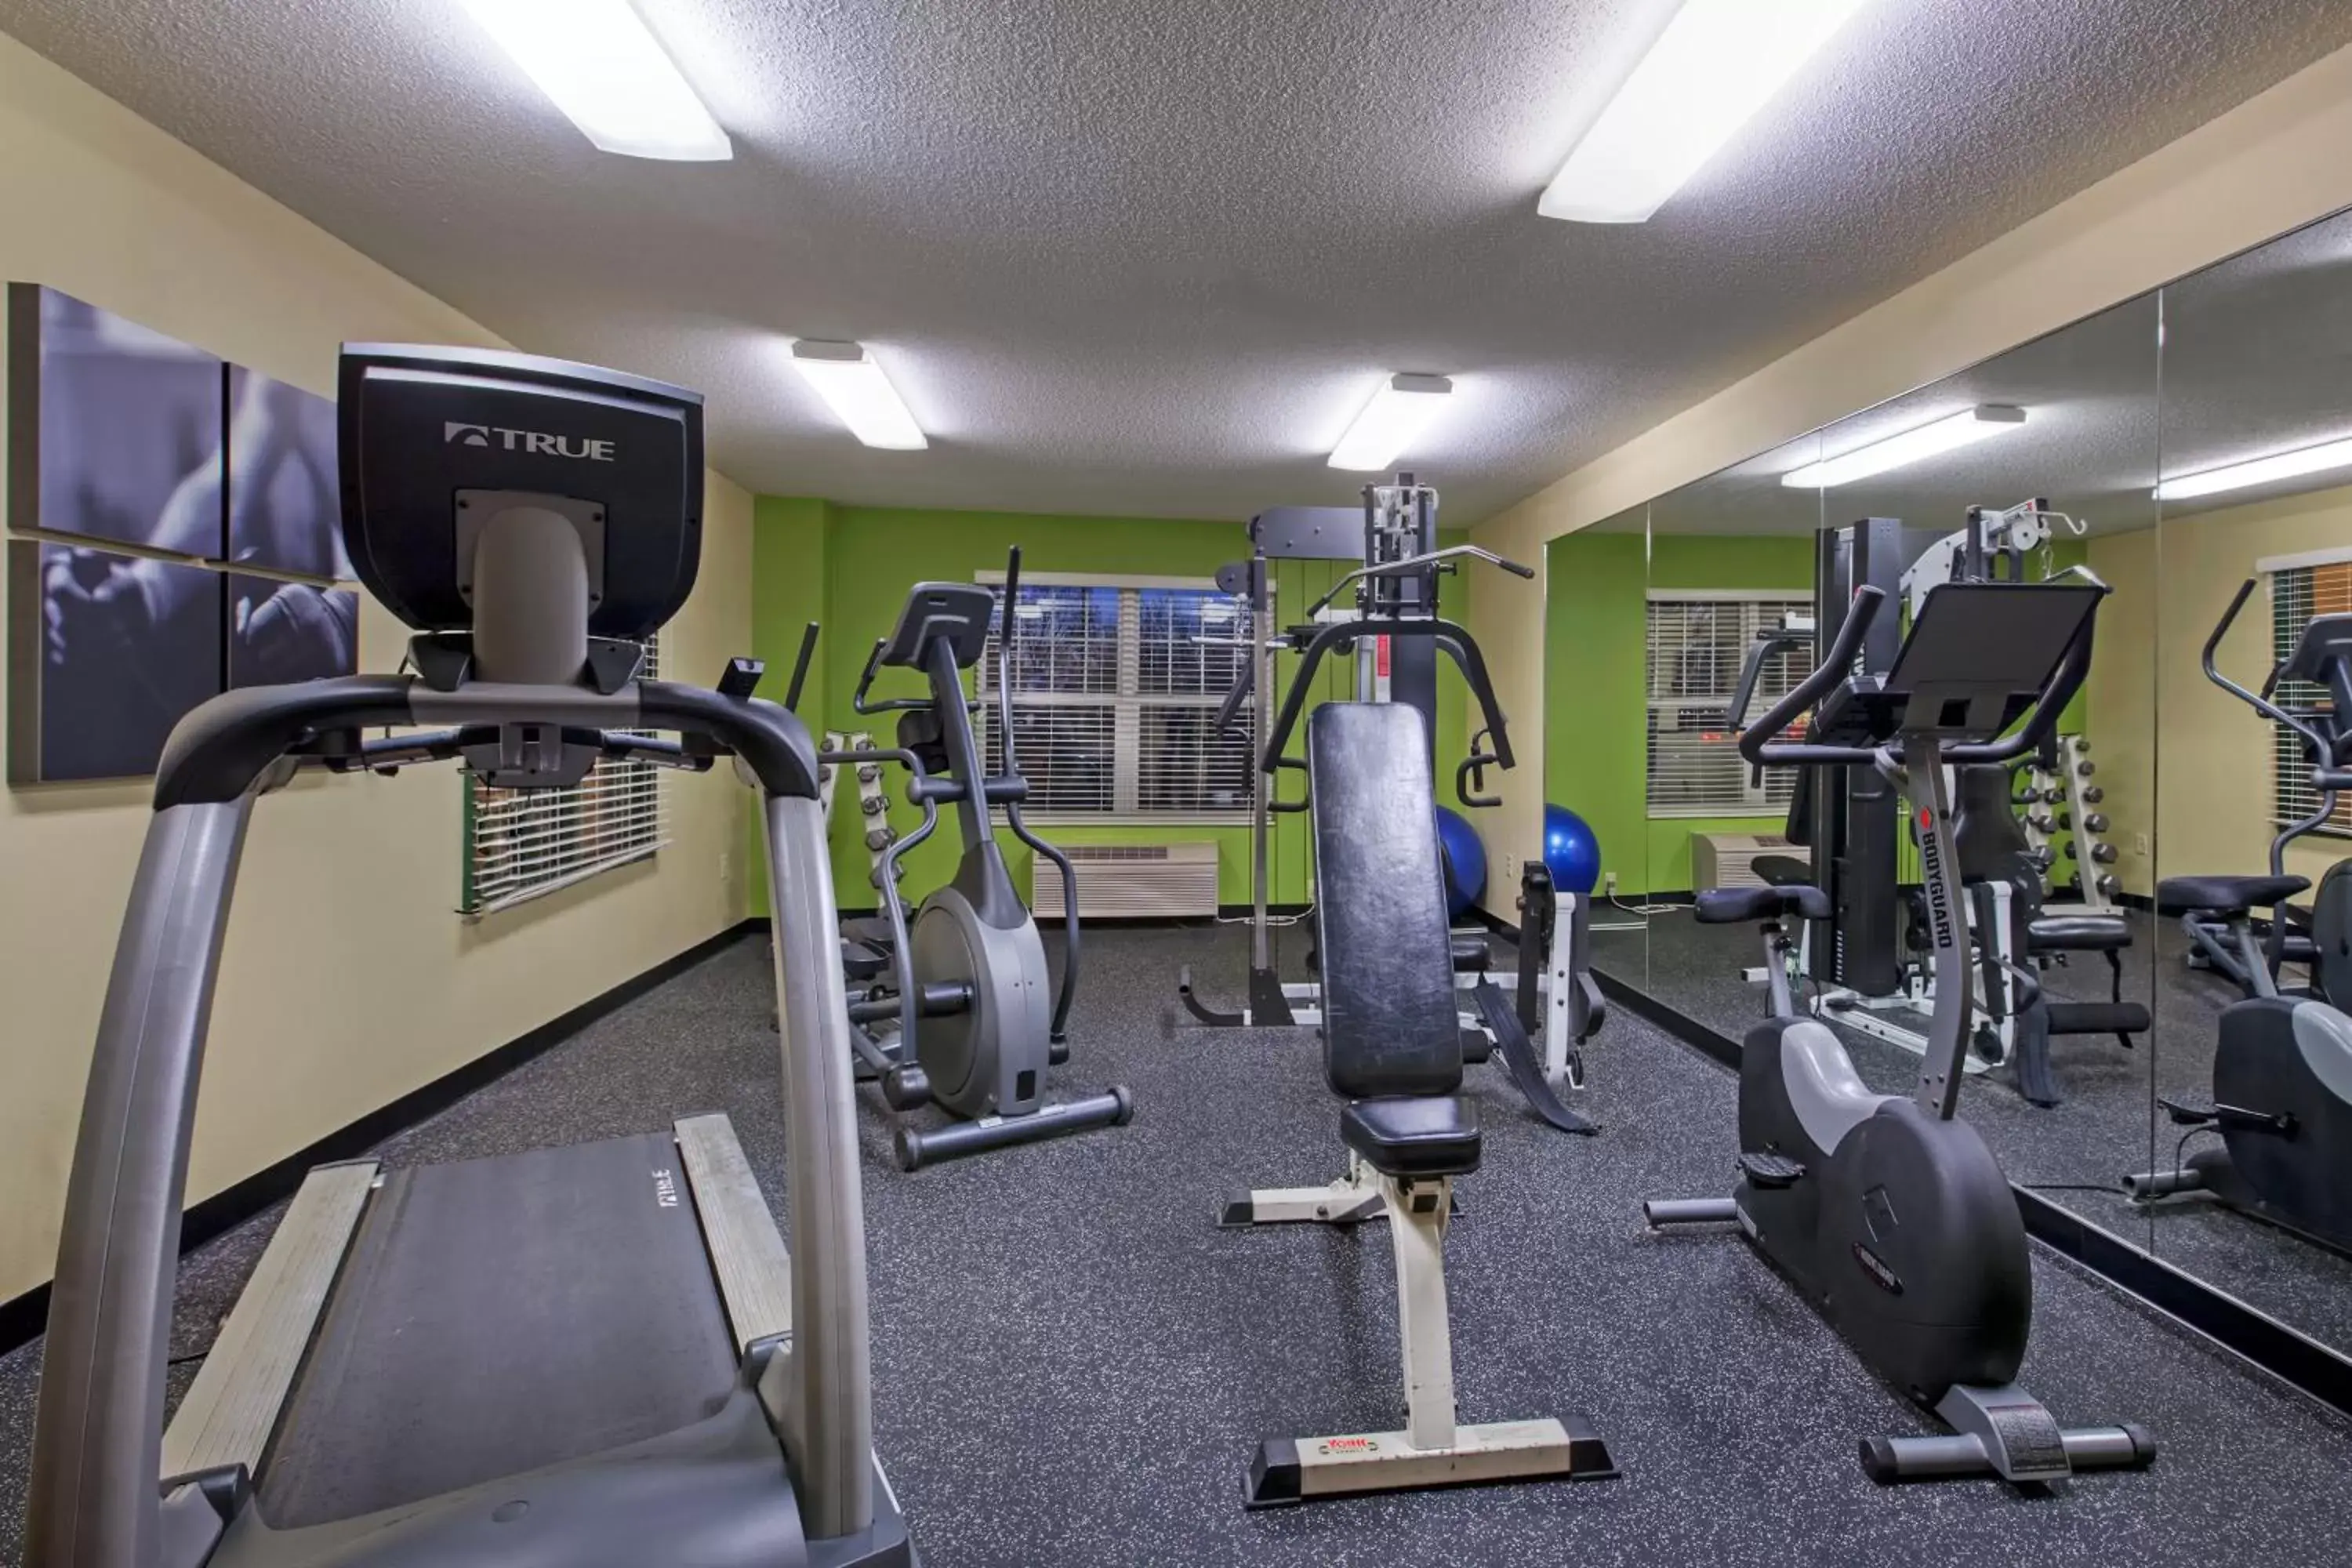 Fitness centre/facilities, Fitness Center/Facilities in Country Inn & Suites by Radisson, Mason City, IA